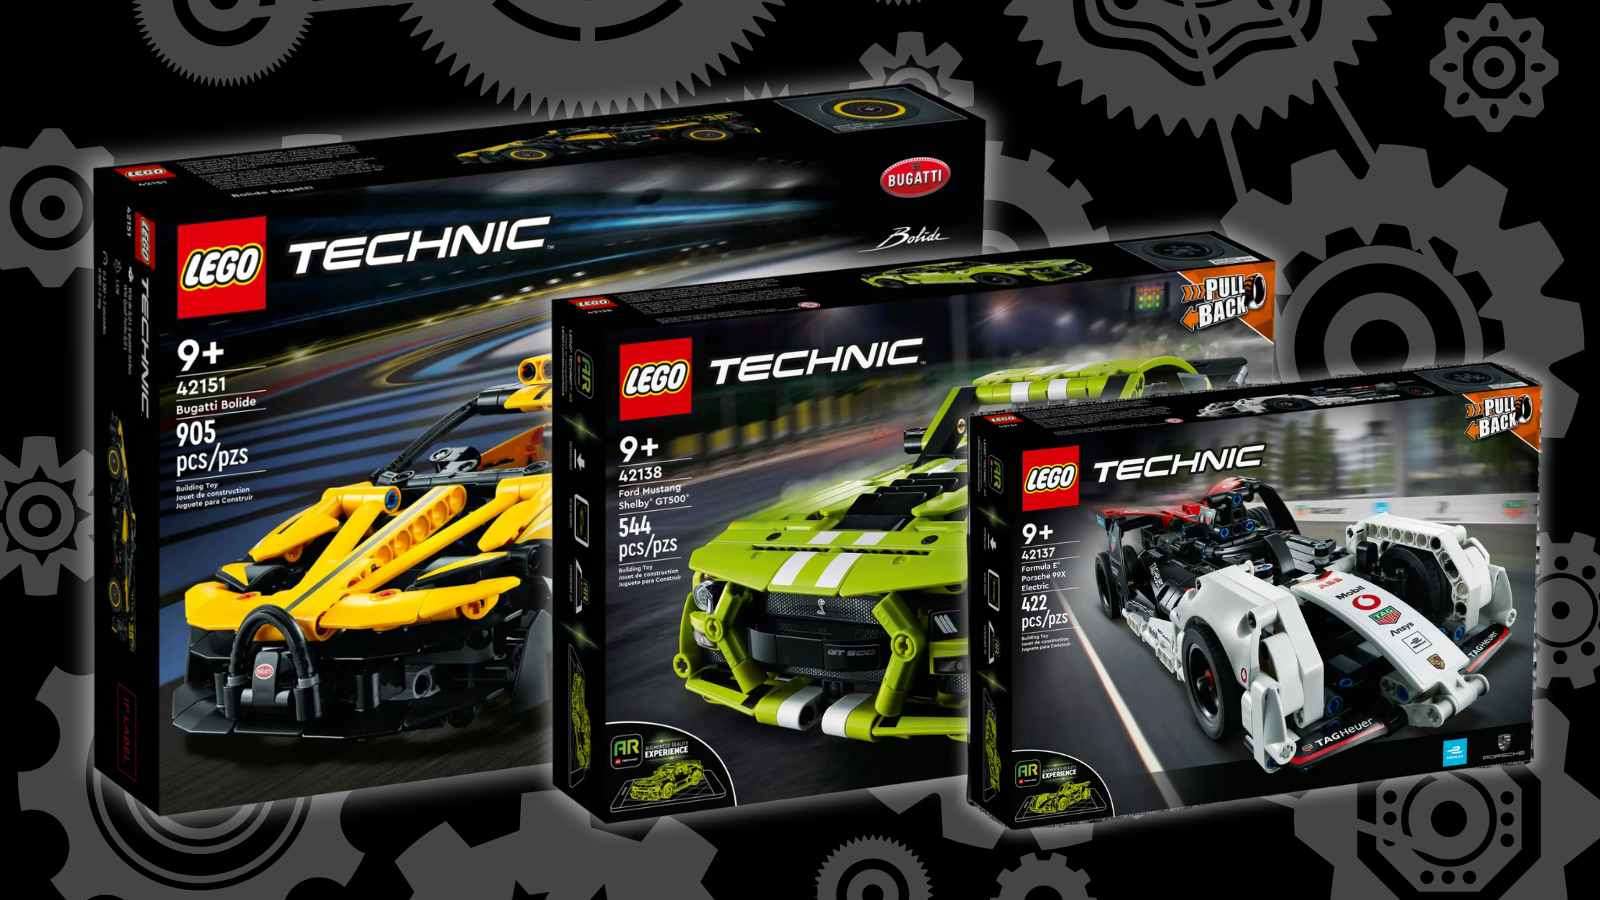 Three of the LEGO Technic sets on discount at Amazon